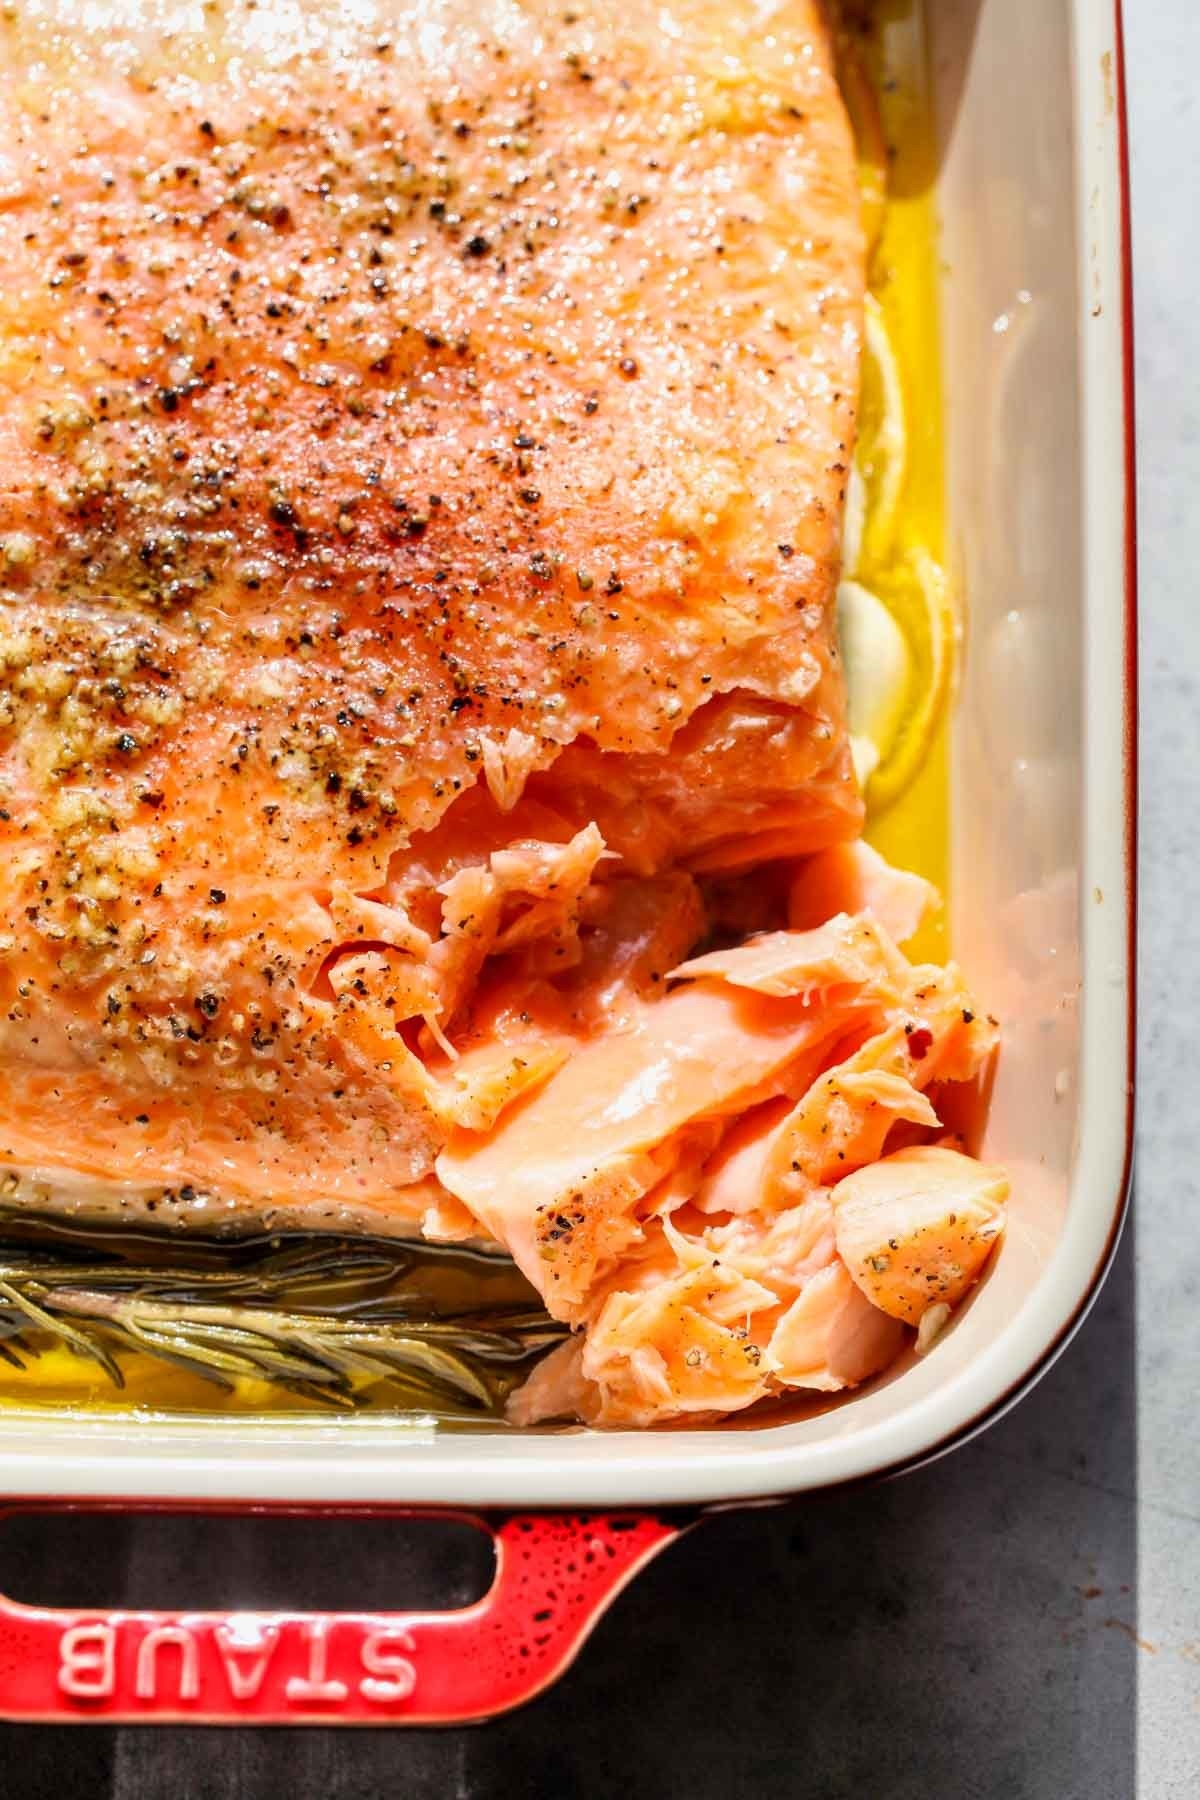 Slow cooked salmon in a baking dish.